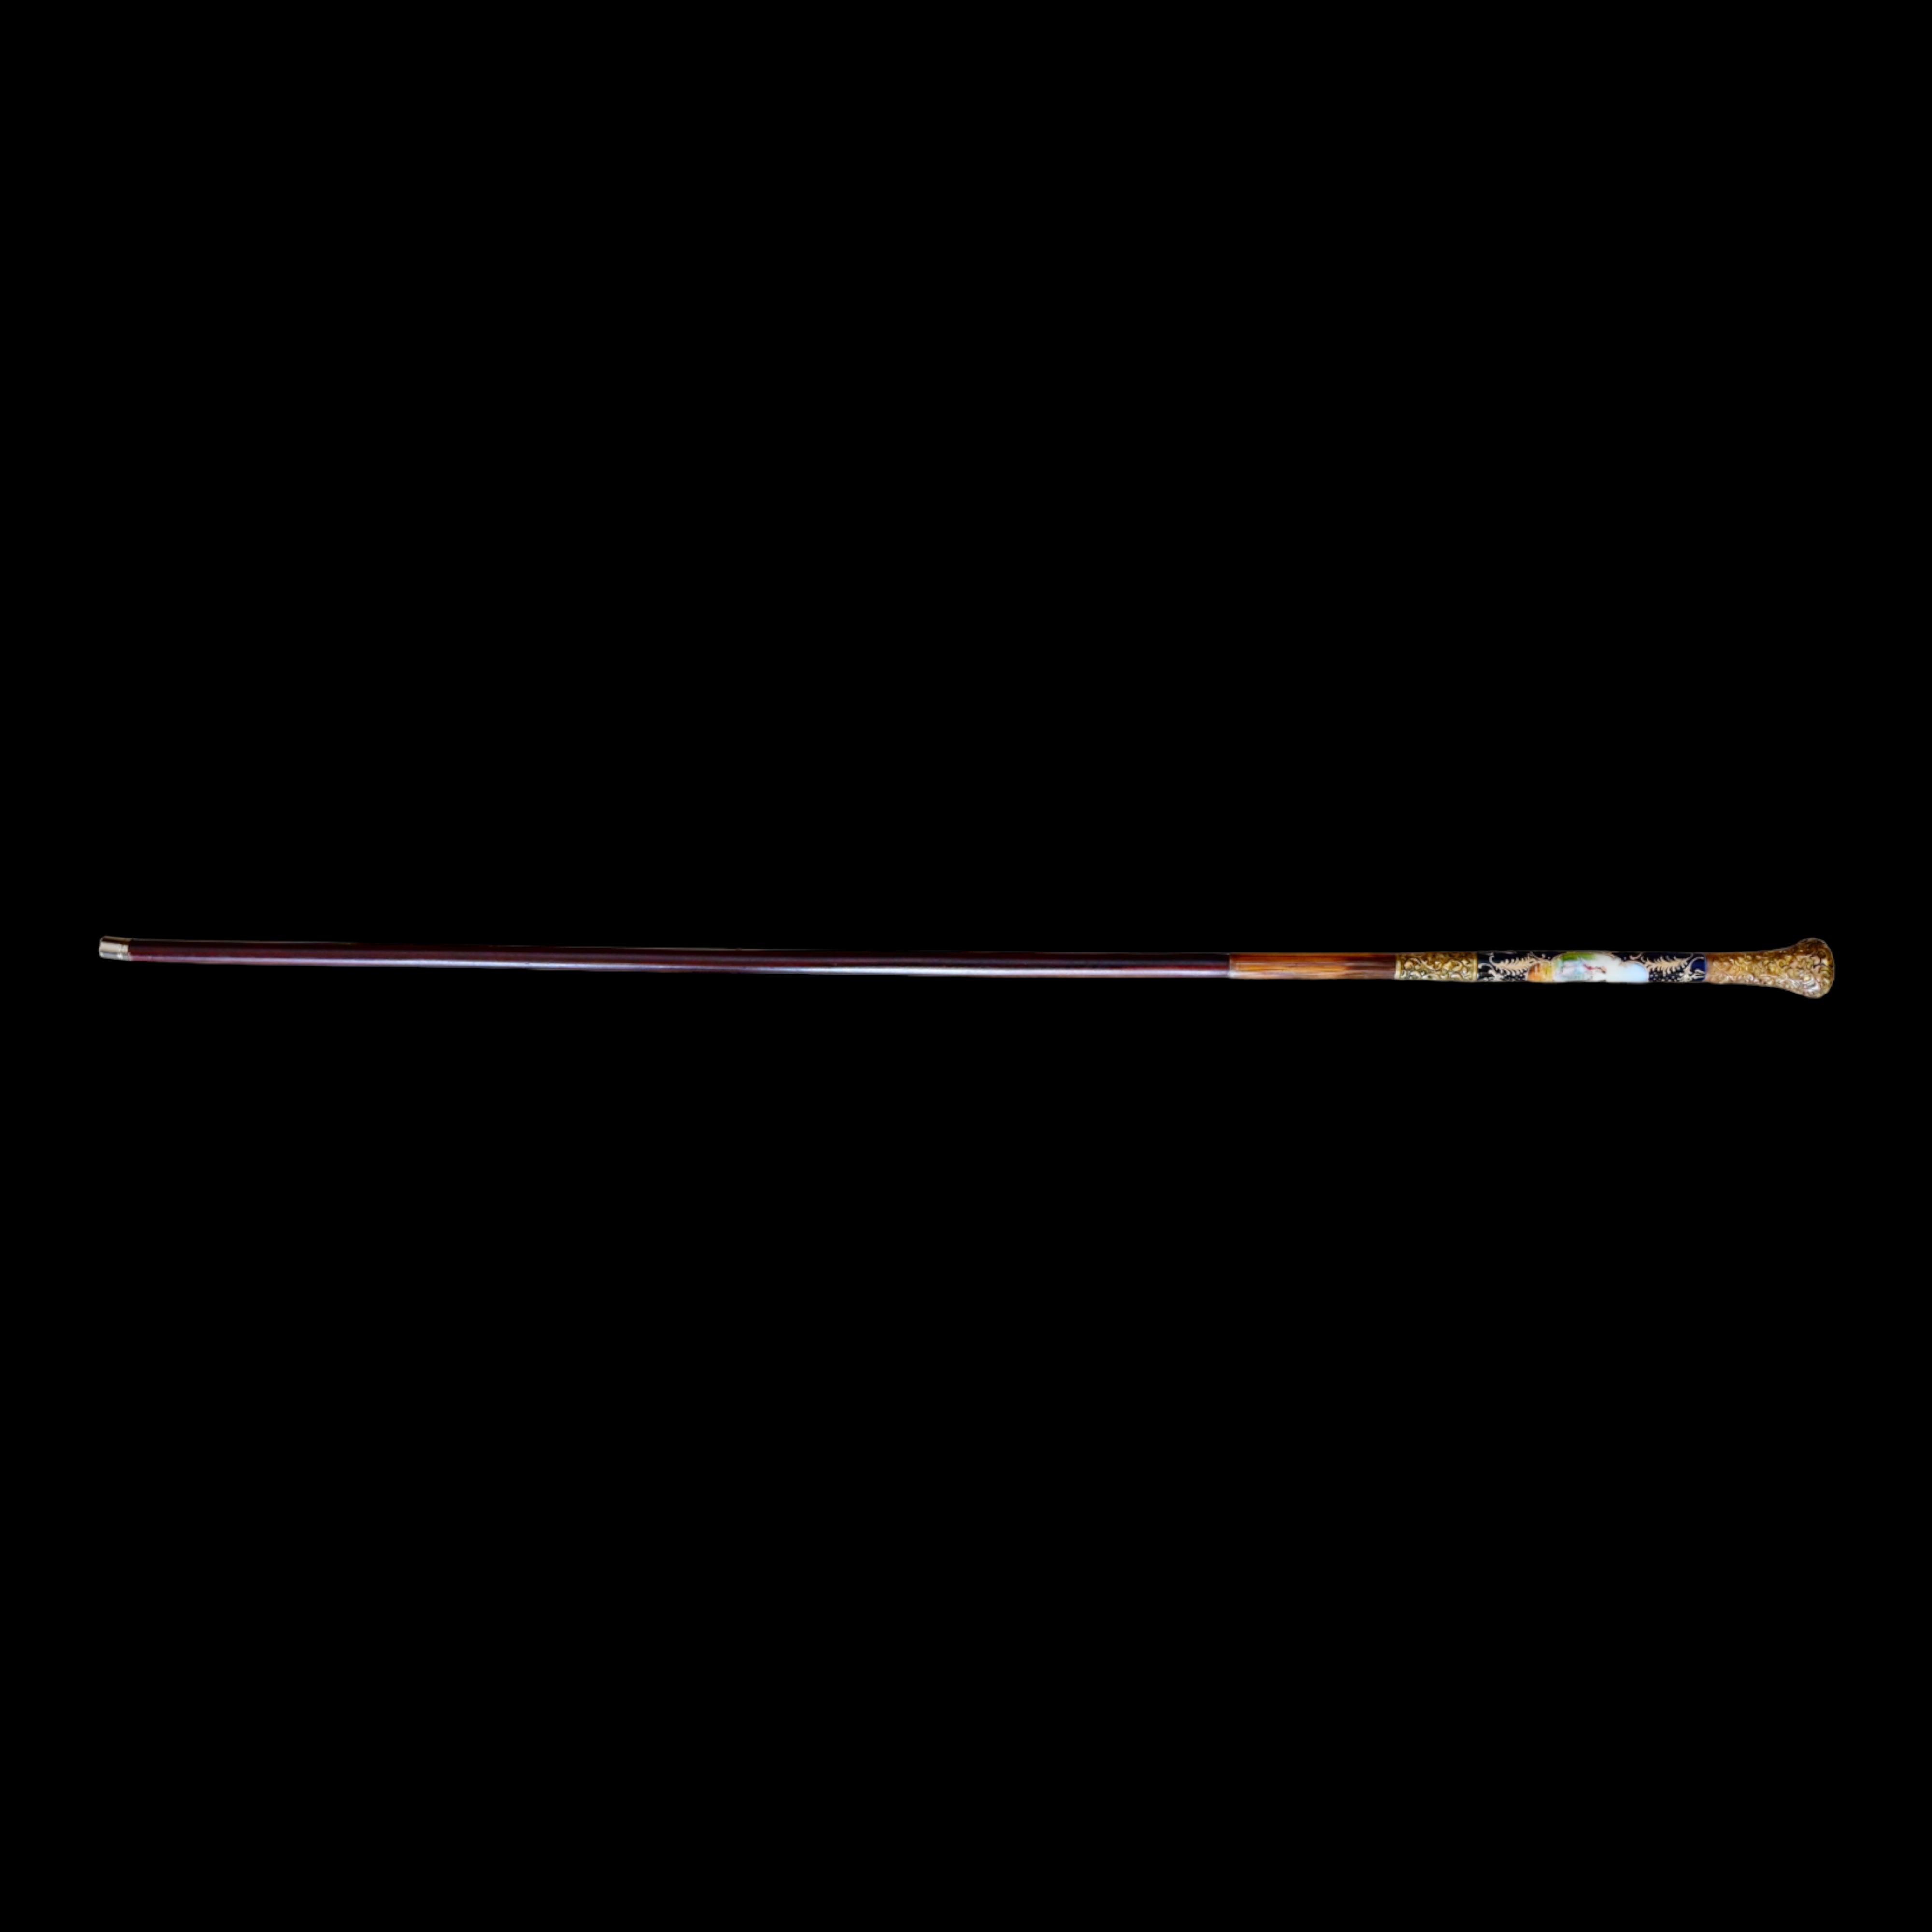 Rare Cane with Porcelain part. Limoge Porcelain Manufactory. France, 19th century. - Image 2 of 12